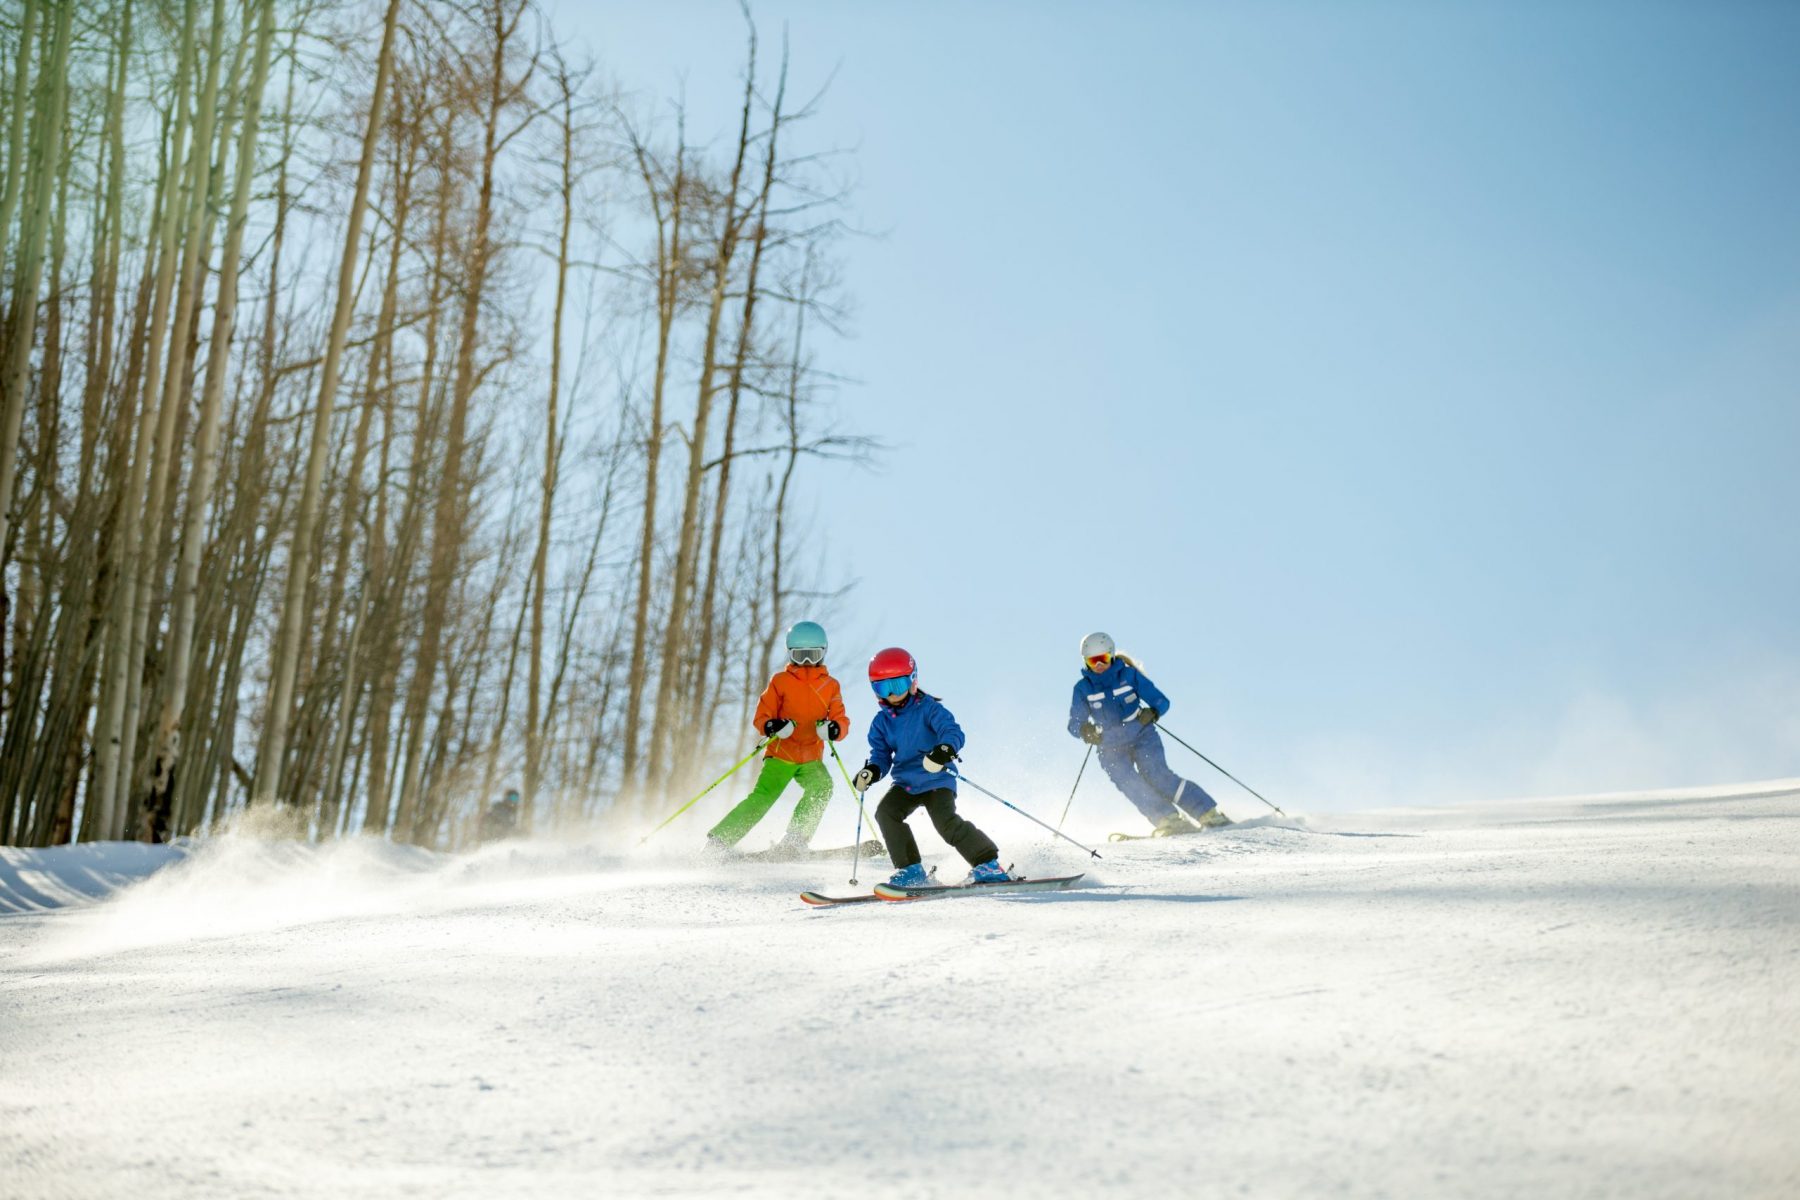 Kids Ski School at Vail, CO. Photo: Daniel Milchev. Vail Resorts. The Must-Read Guide to Vail.